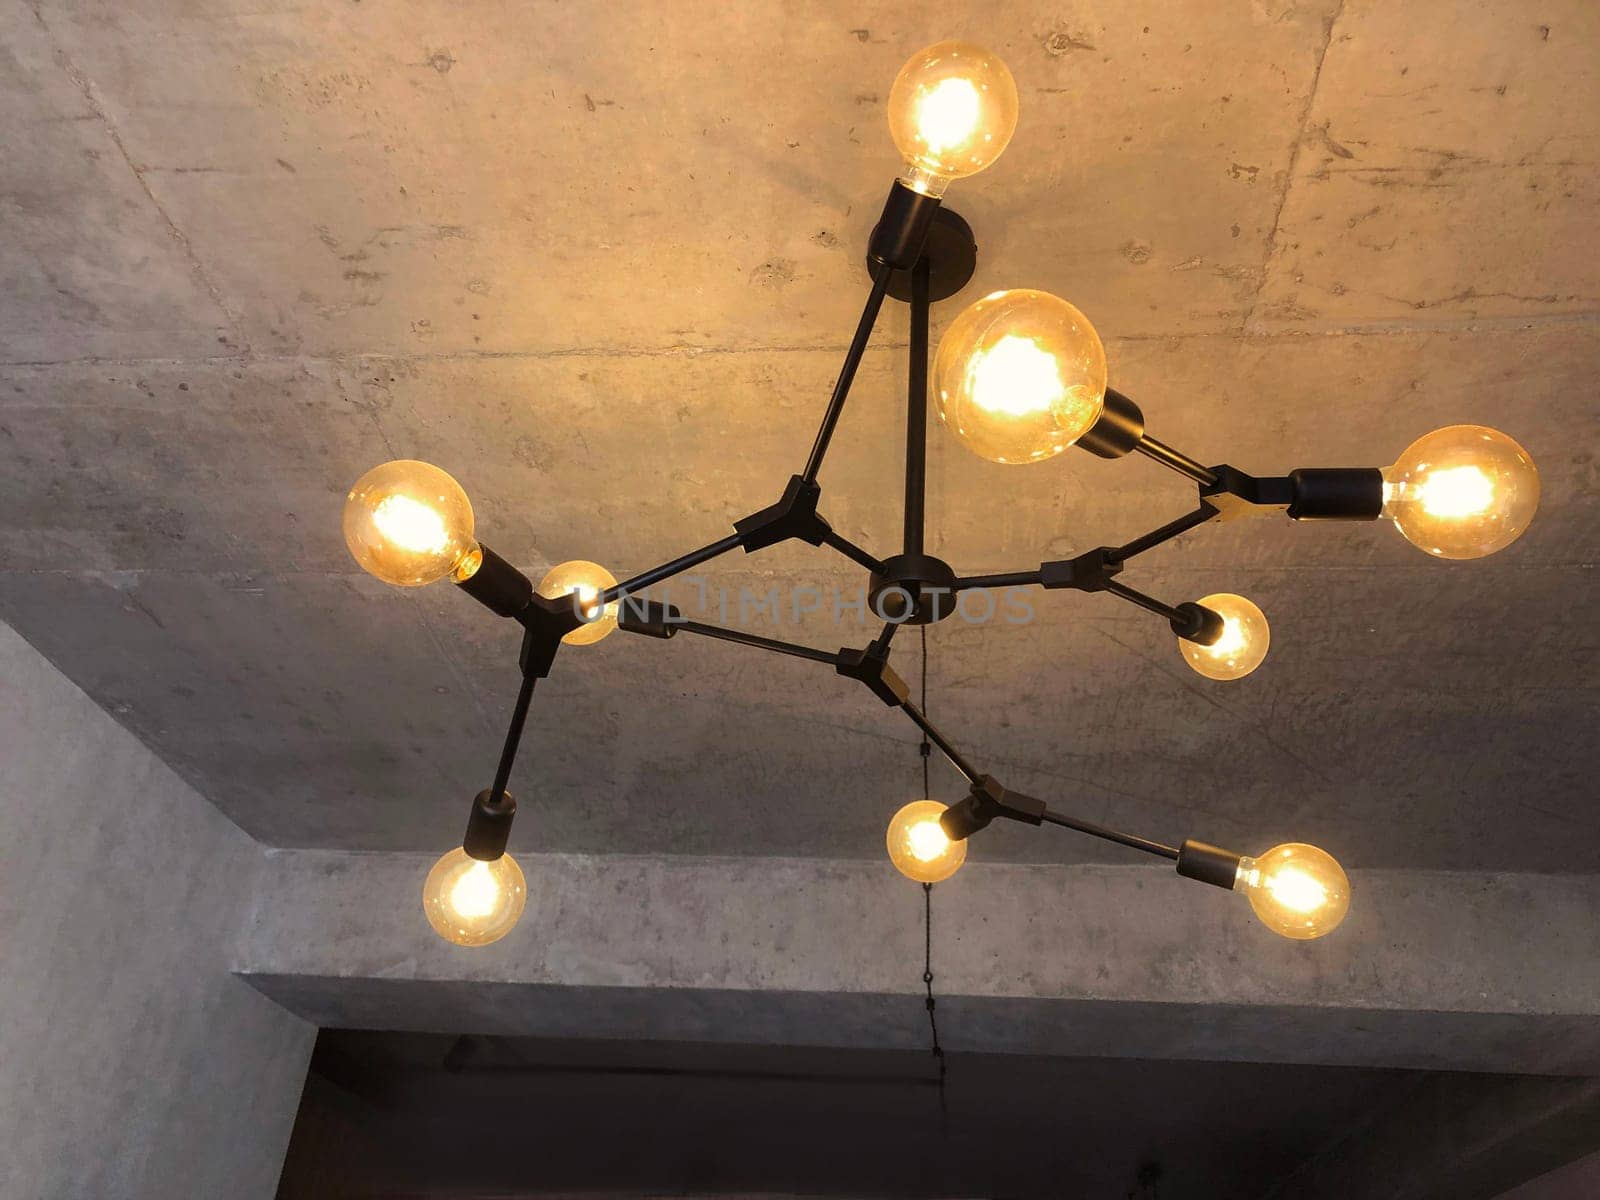 Light bulbs with warm lighting in stylish chandelier with exposed wiring on gray concrete ceiling, interior in retro loft design